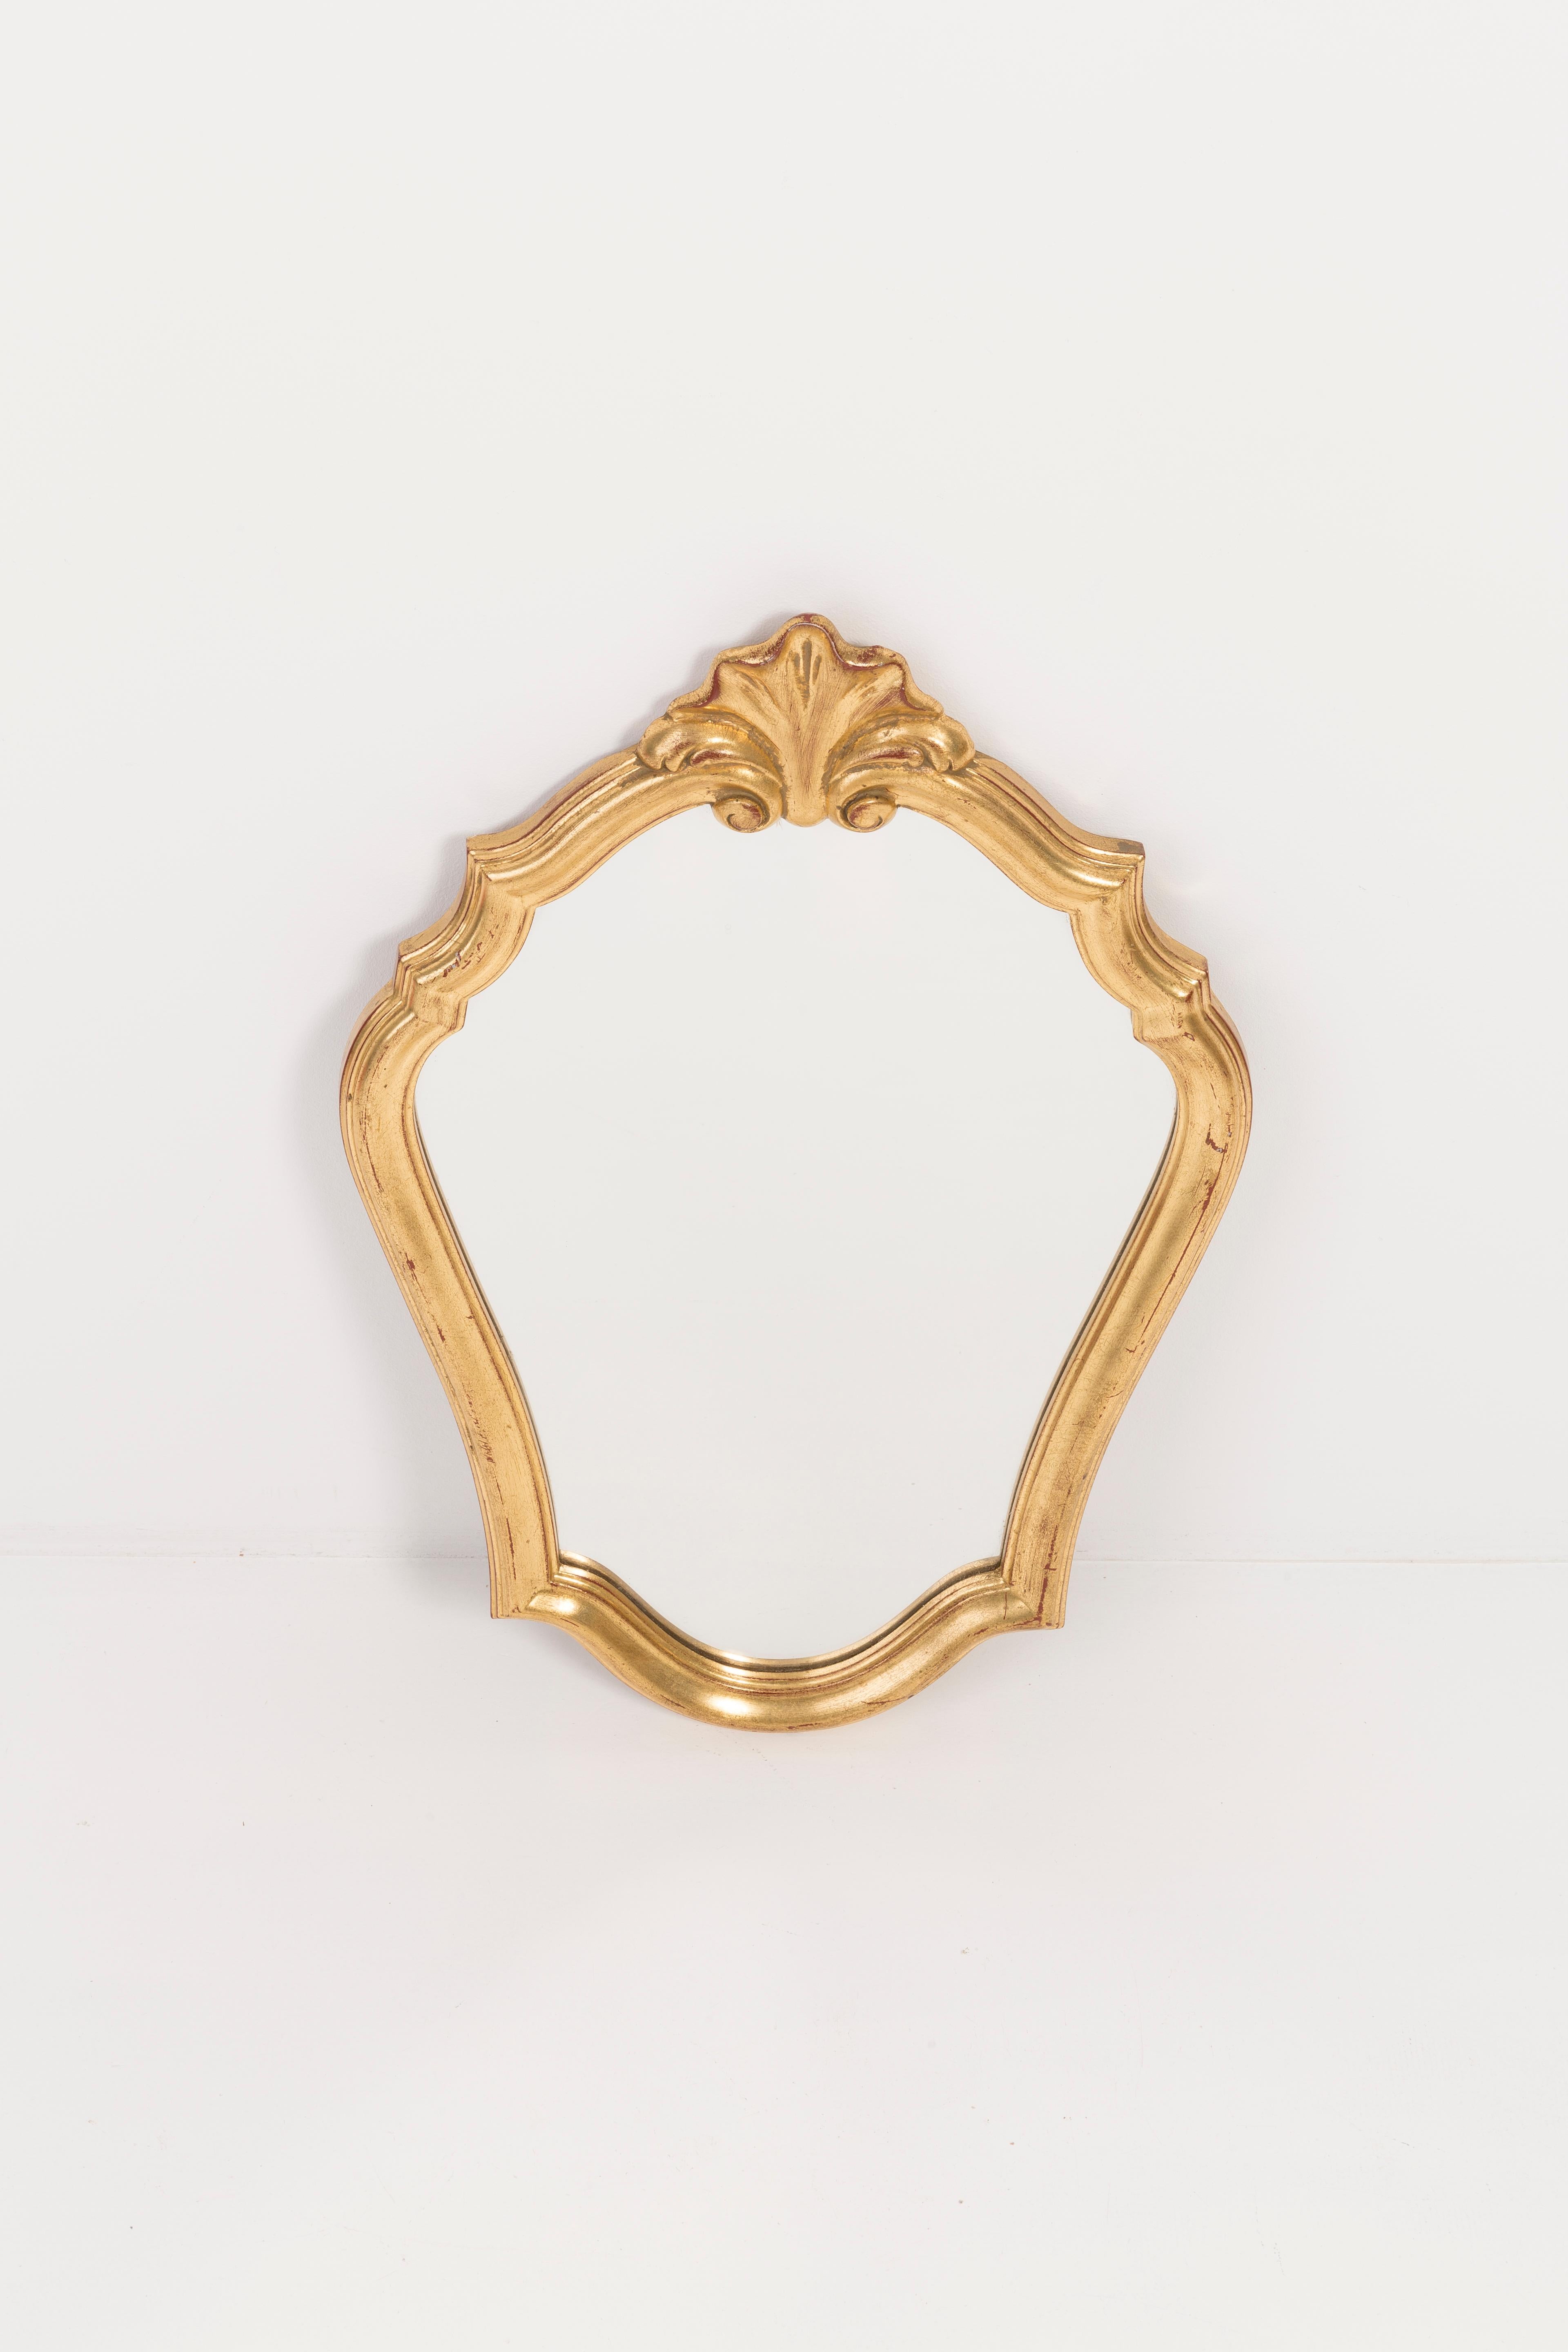 A mirror in a golden decorative frame from Belgium. The frame is made of wood. Mirror is in very good vintage condition, no damage or cracks in the frame. Original glass. Beautiful piece for every interior! Only one unique piece.